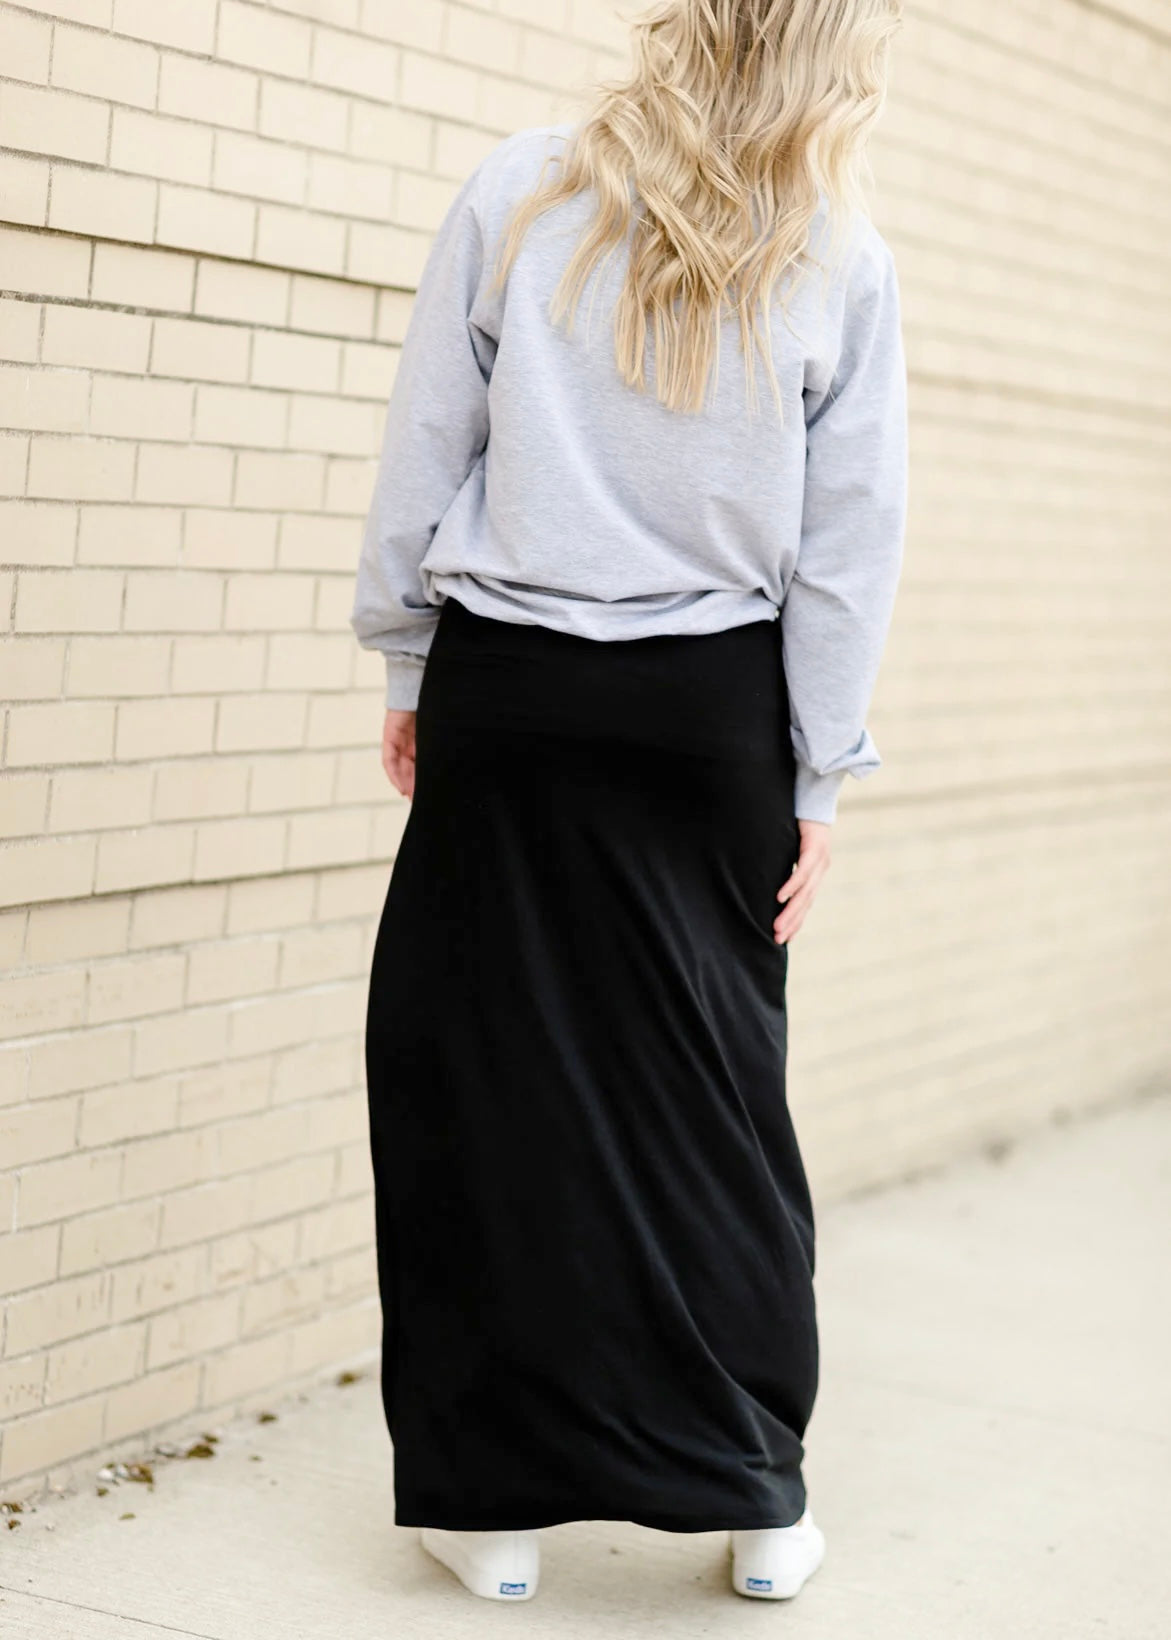 Rear view of a young woman wearing a solid black Maxi Skirt with Pockets featuring a Soft & Stretchy Premium Fabric Blend, Adjustable Drawstring Tie Waist, and Pockets. Available in sizes S-3XL in both solid Black or Navy Blue. Discover our Best Selling All-year All-season Maxi Skirt for every body shape & size.